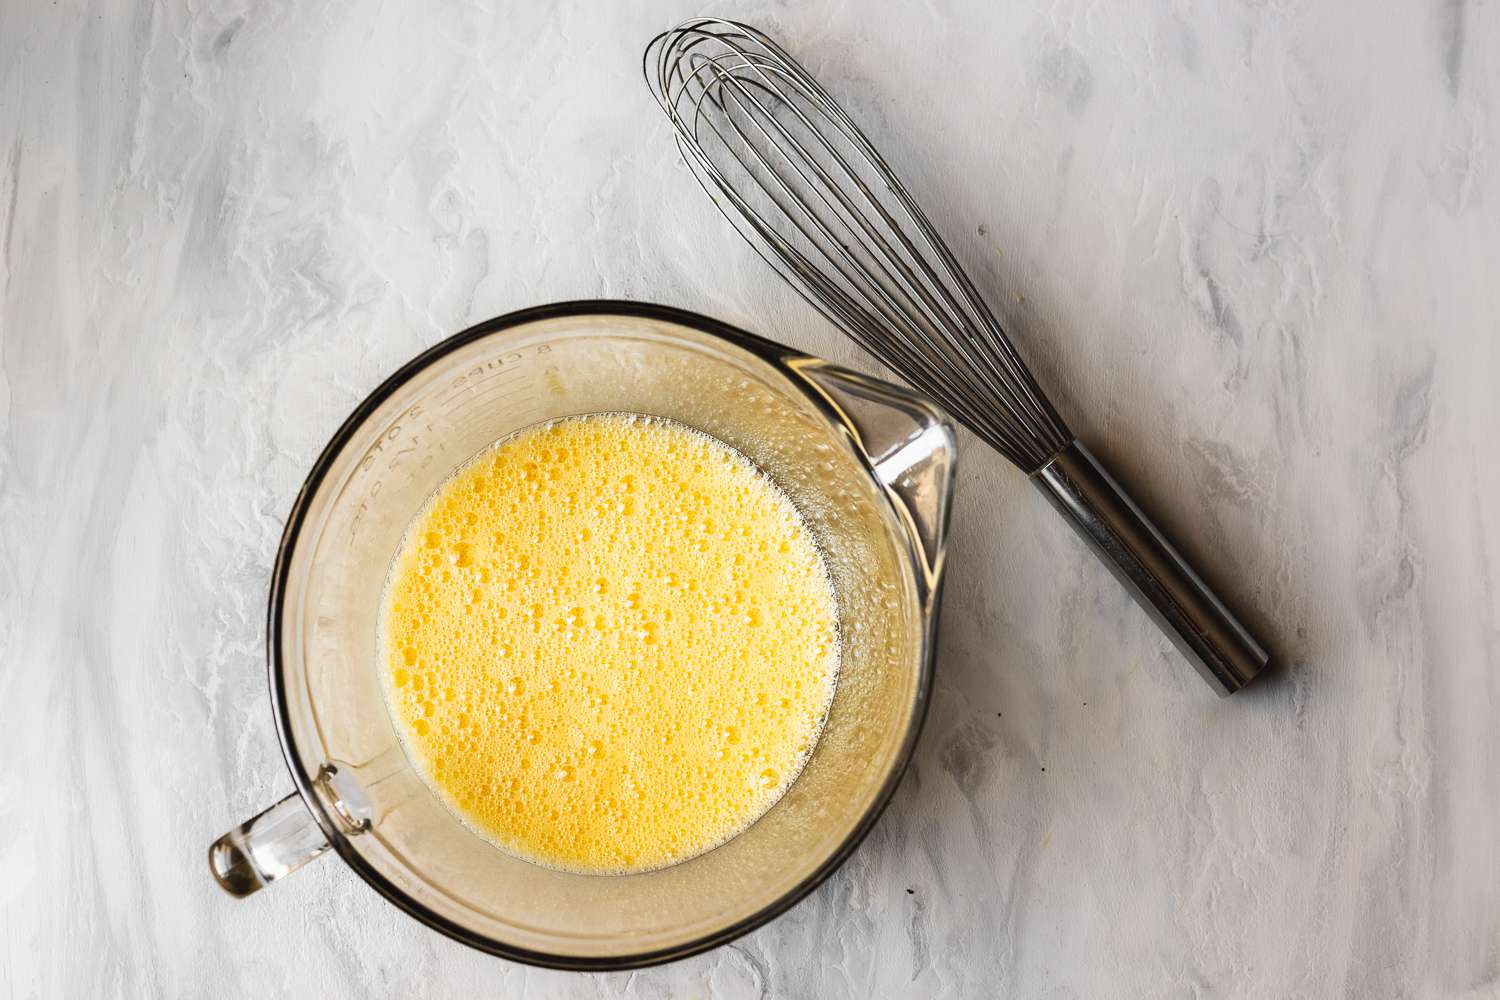 Scrambled eggs whisked together in a measuring cup with a whisk